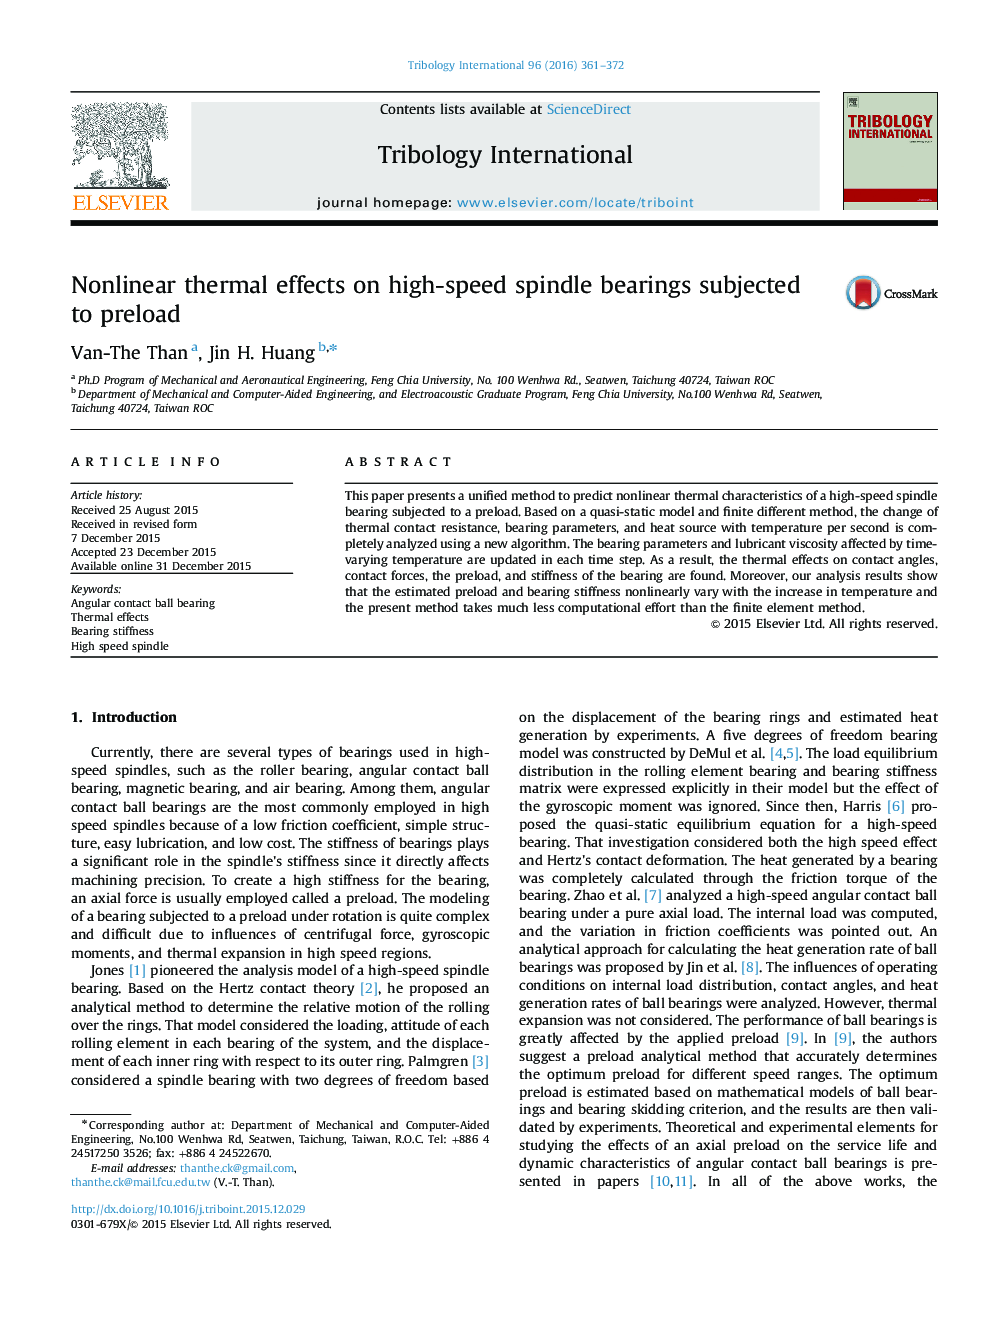 Nonlinear thermal effects on high-speed spindle bearings subjected to preload